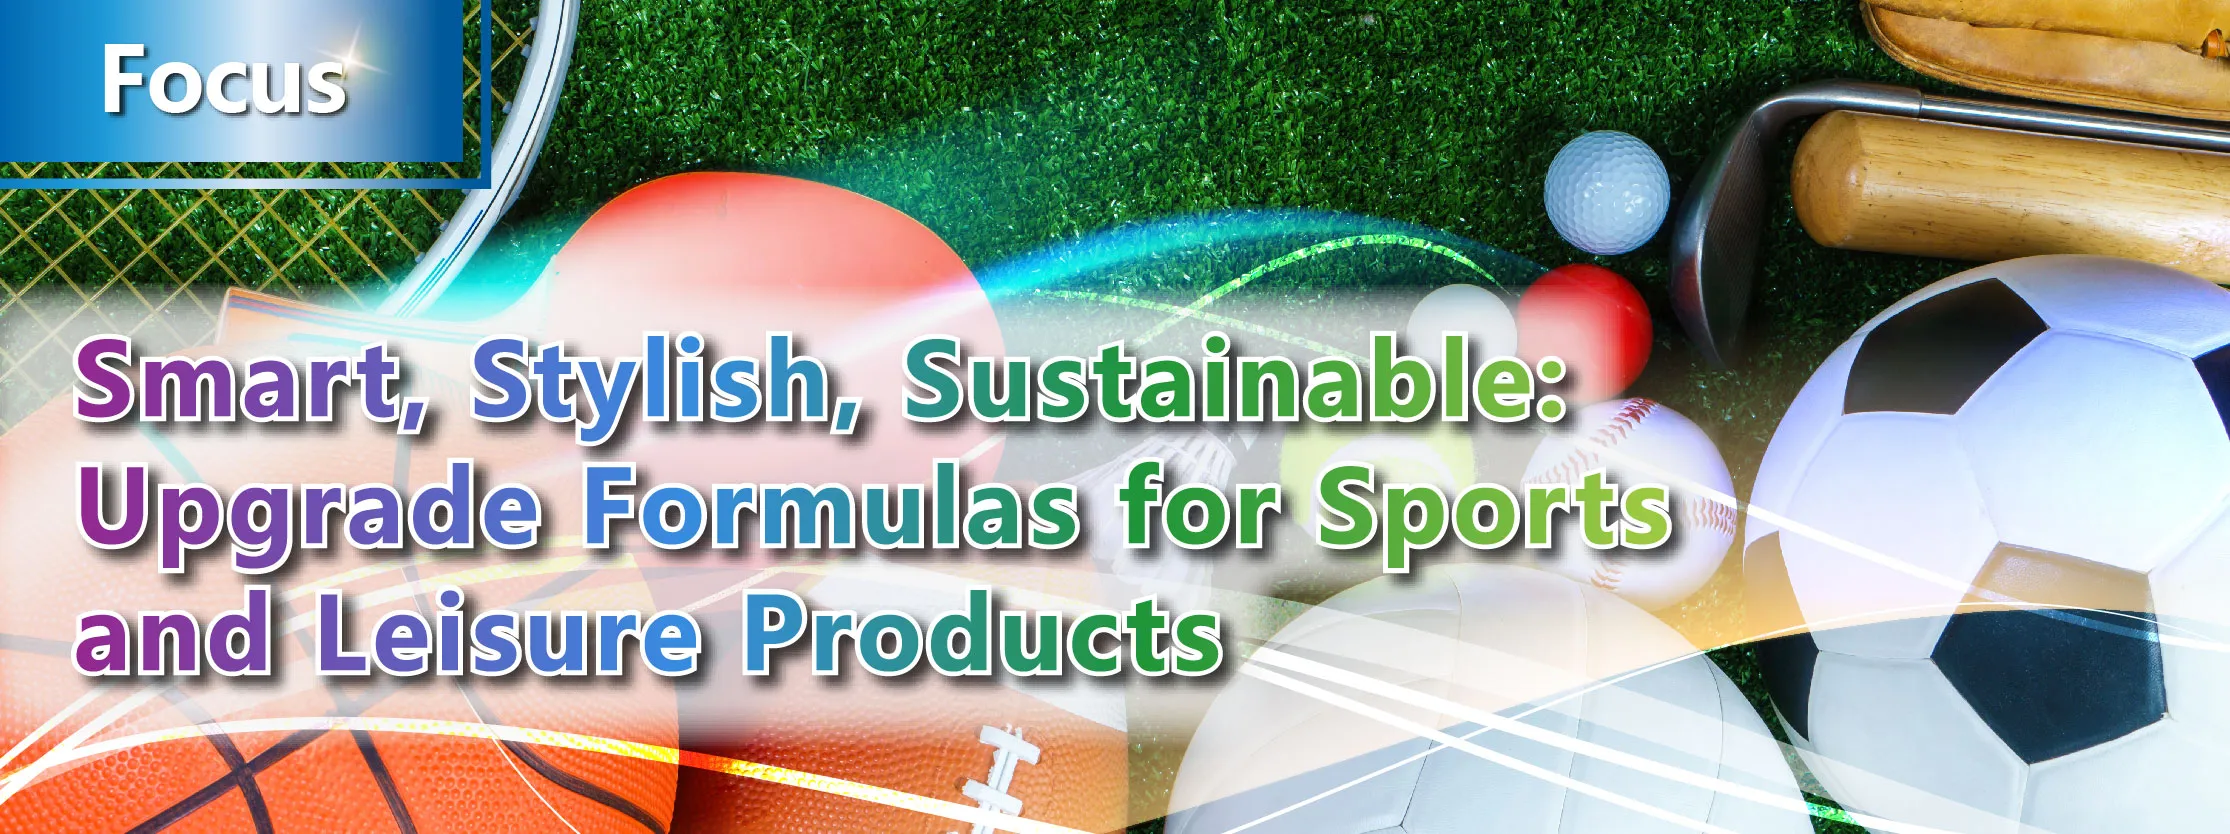 Smart, Stylish, Sustainable: Upgrade Formulas for Sports and Leisure Products